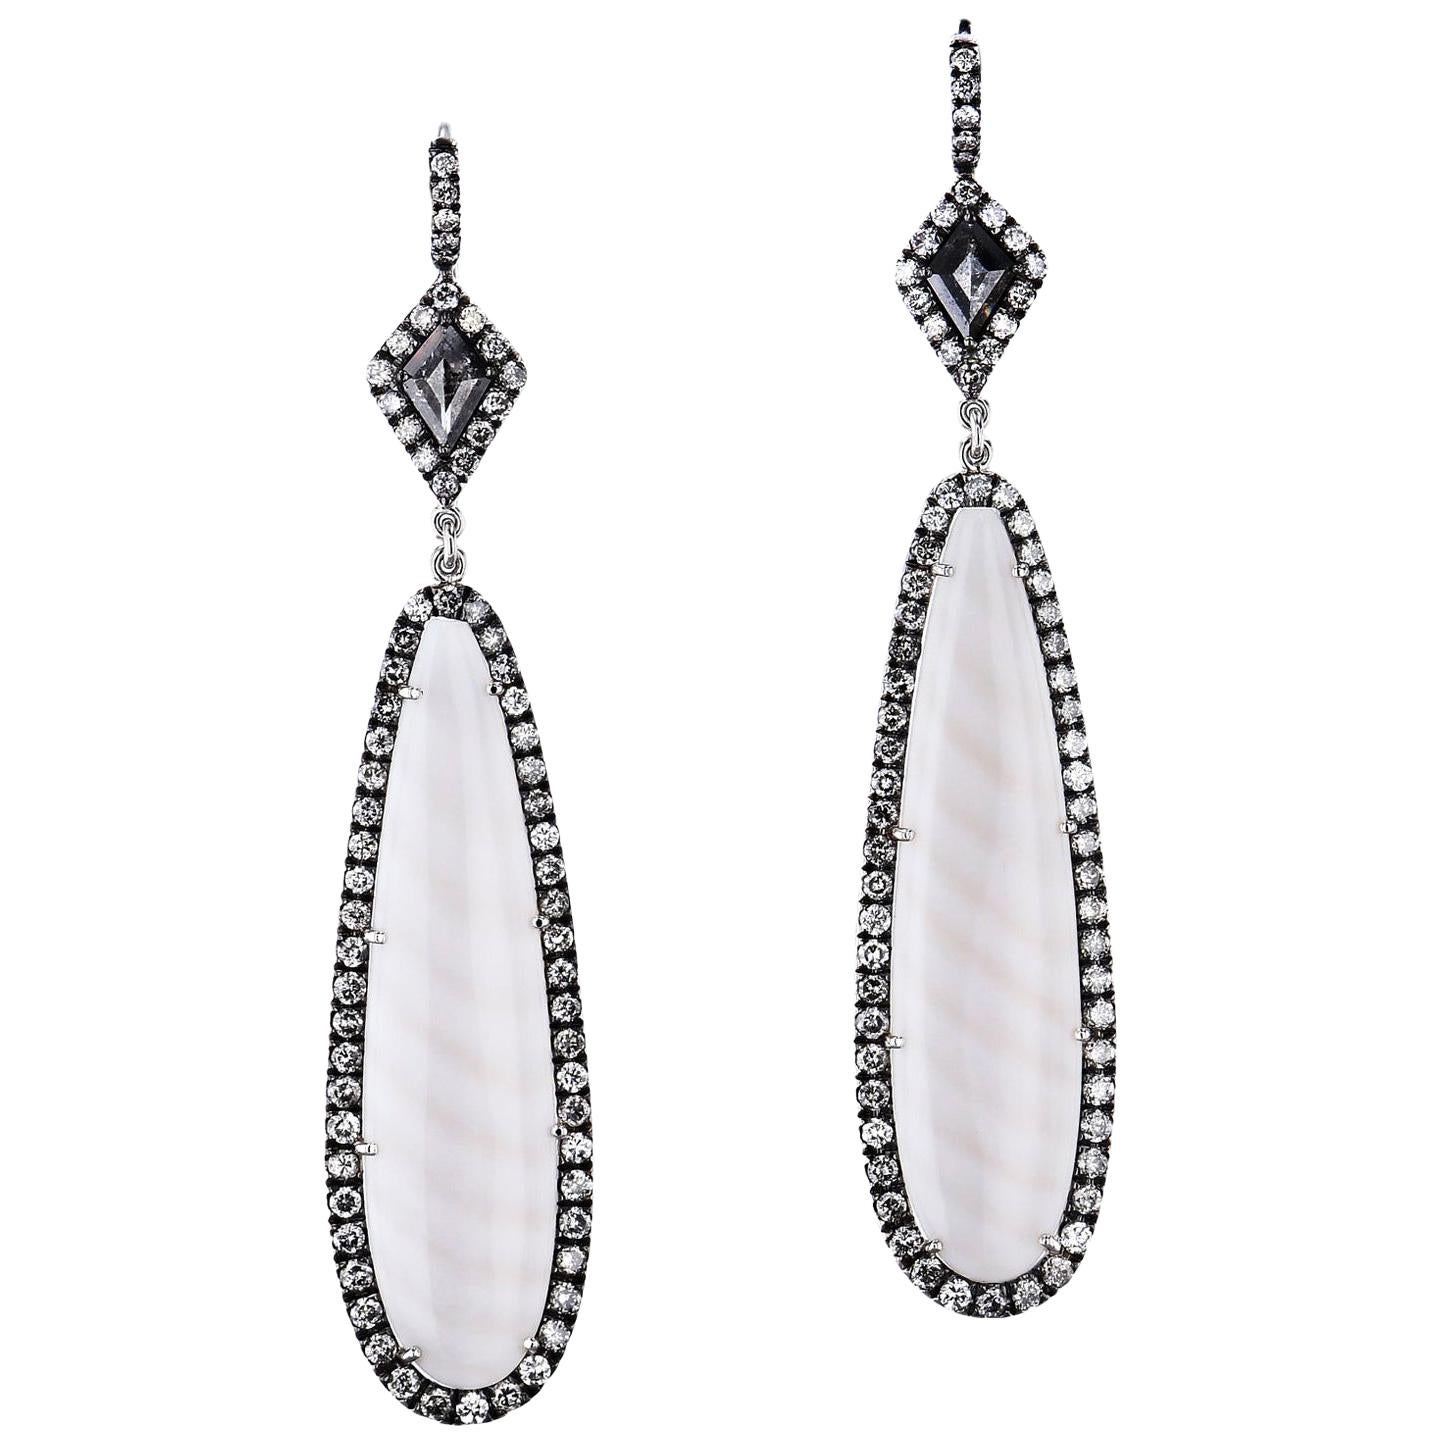 Striped Madagascar Chalcedony Drop Earrings Natural Black Diamond with Pave For Sale